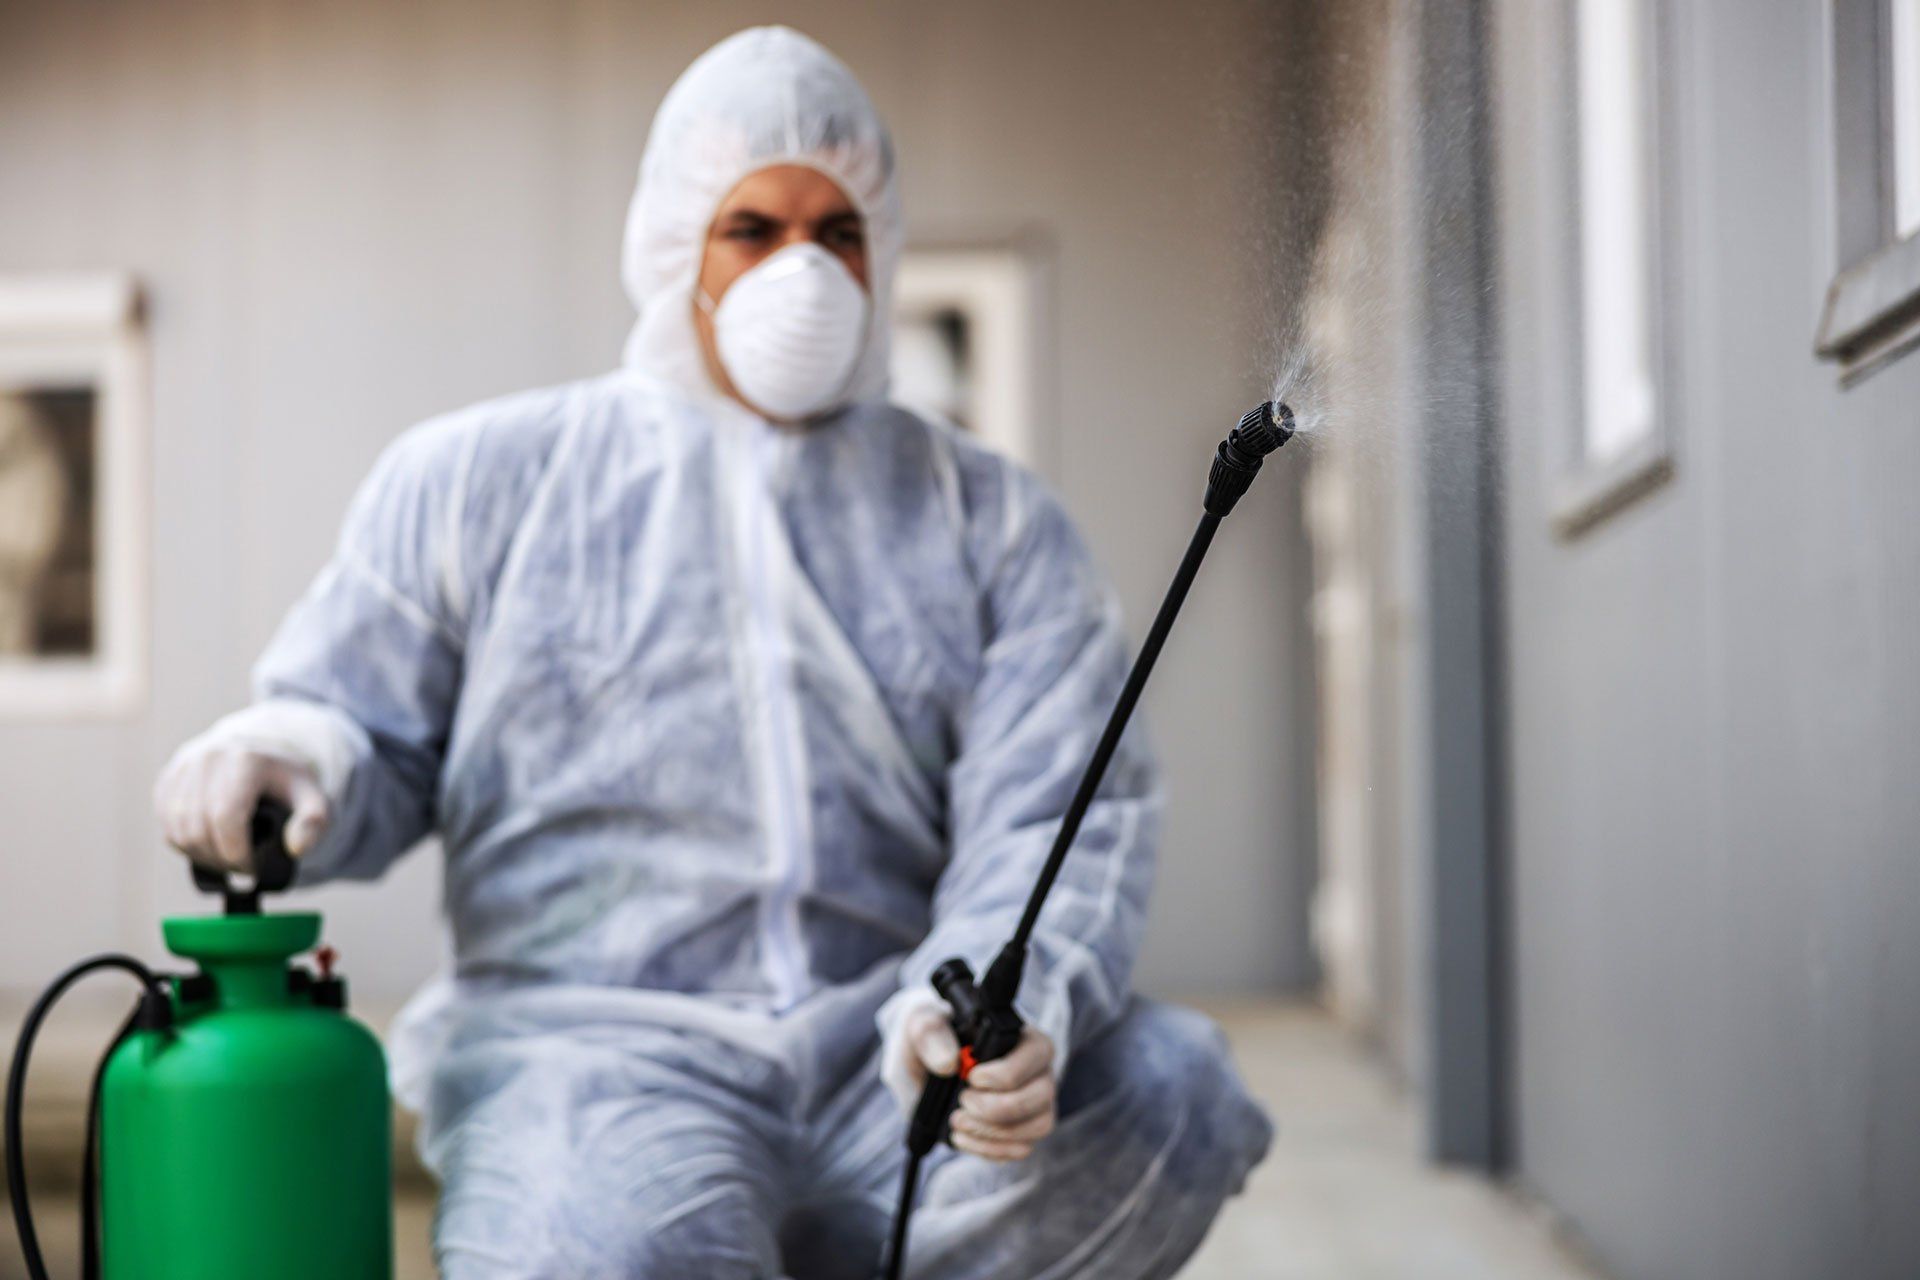 Exterminator performing a residential pest control service